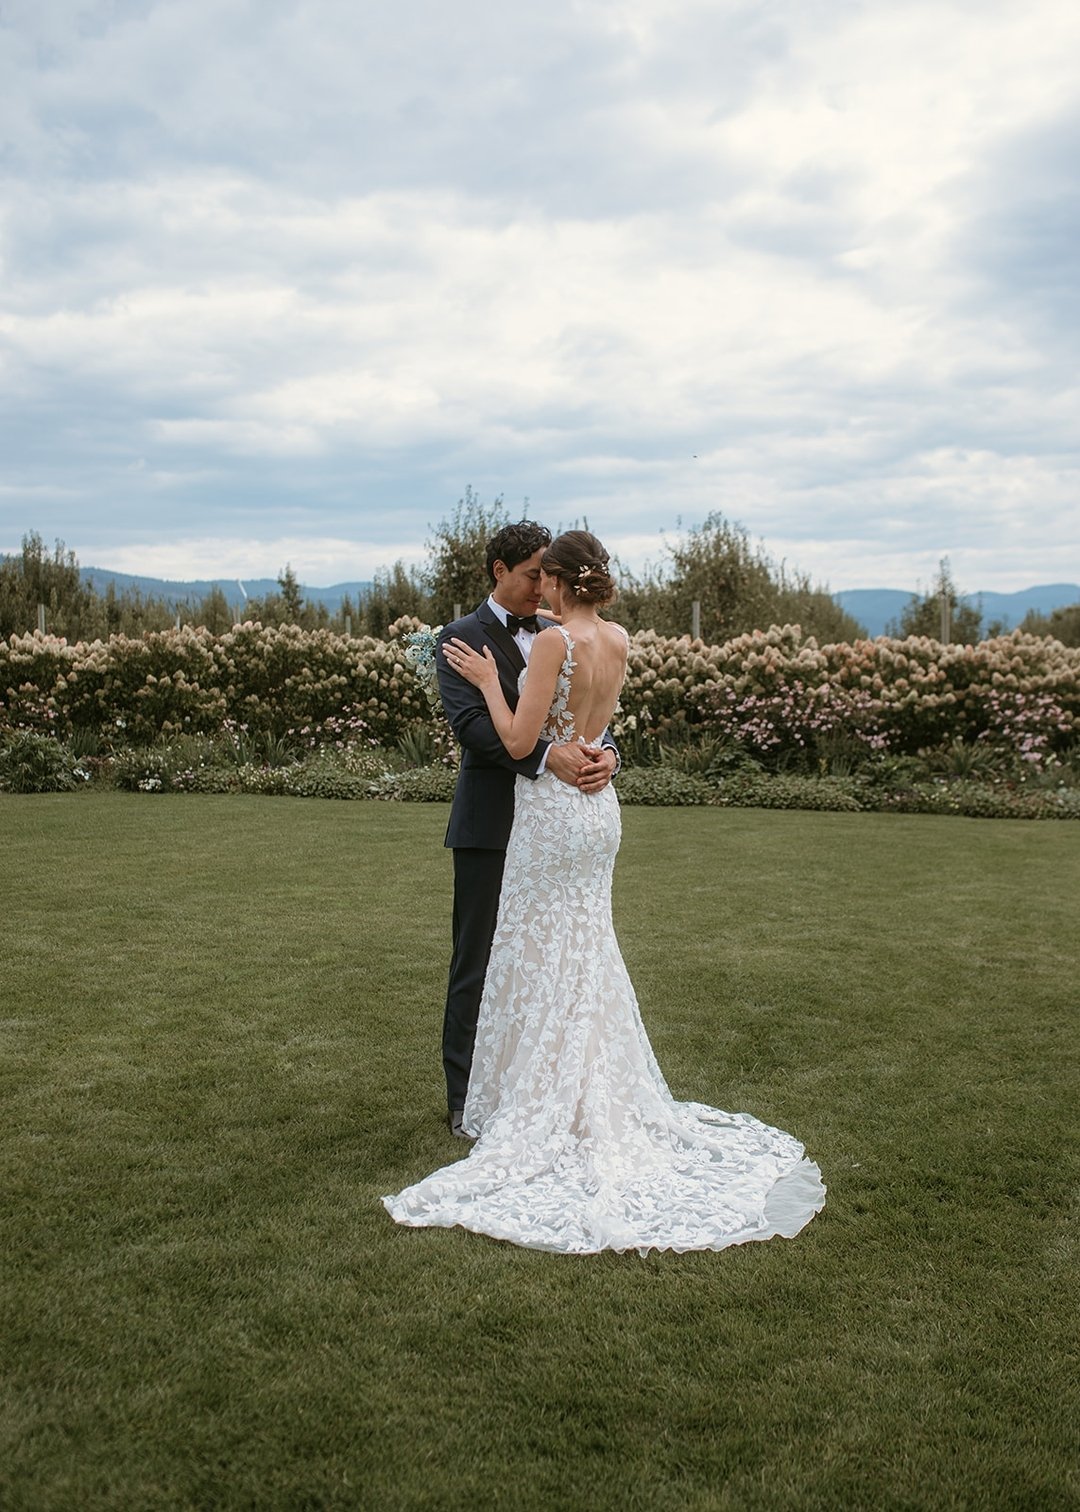 To all you amazing couples embarking on your wedding planning process for your Gorge wedding, we&rsquo;re so glad you found us! 🤗

Here is a snippet of what we have to offer at Gorge Wedding Concierge:

1, Personalized consultation call with Jen to 